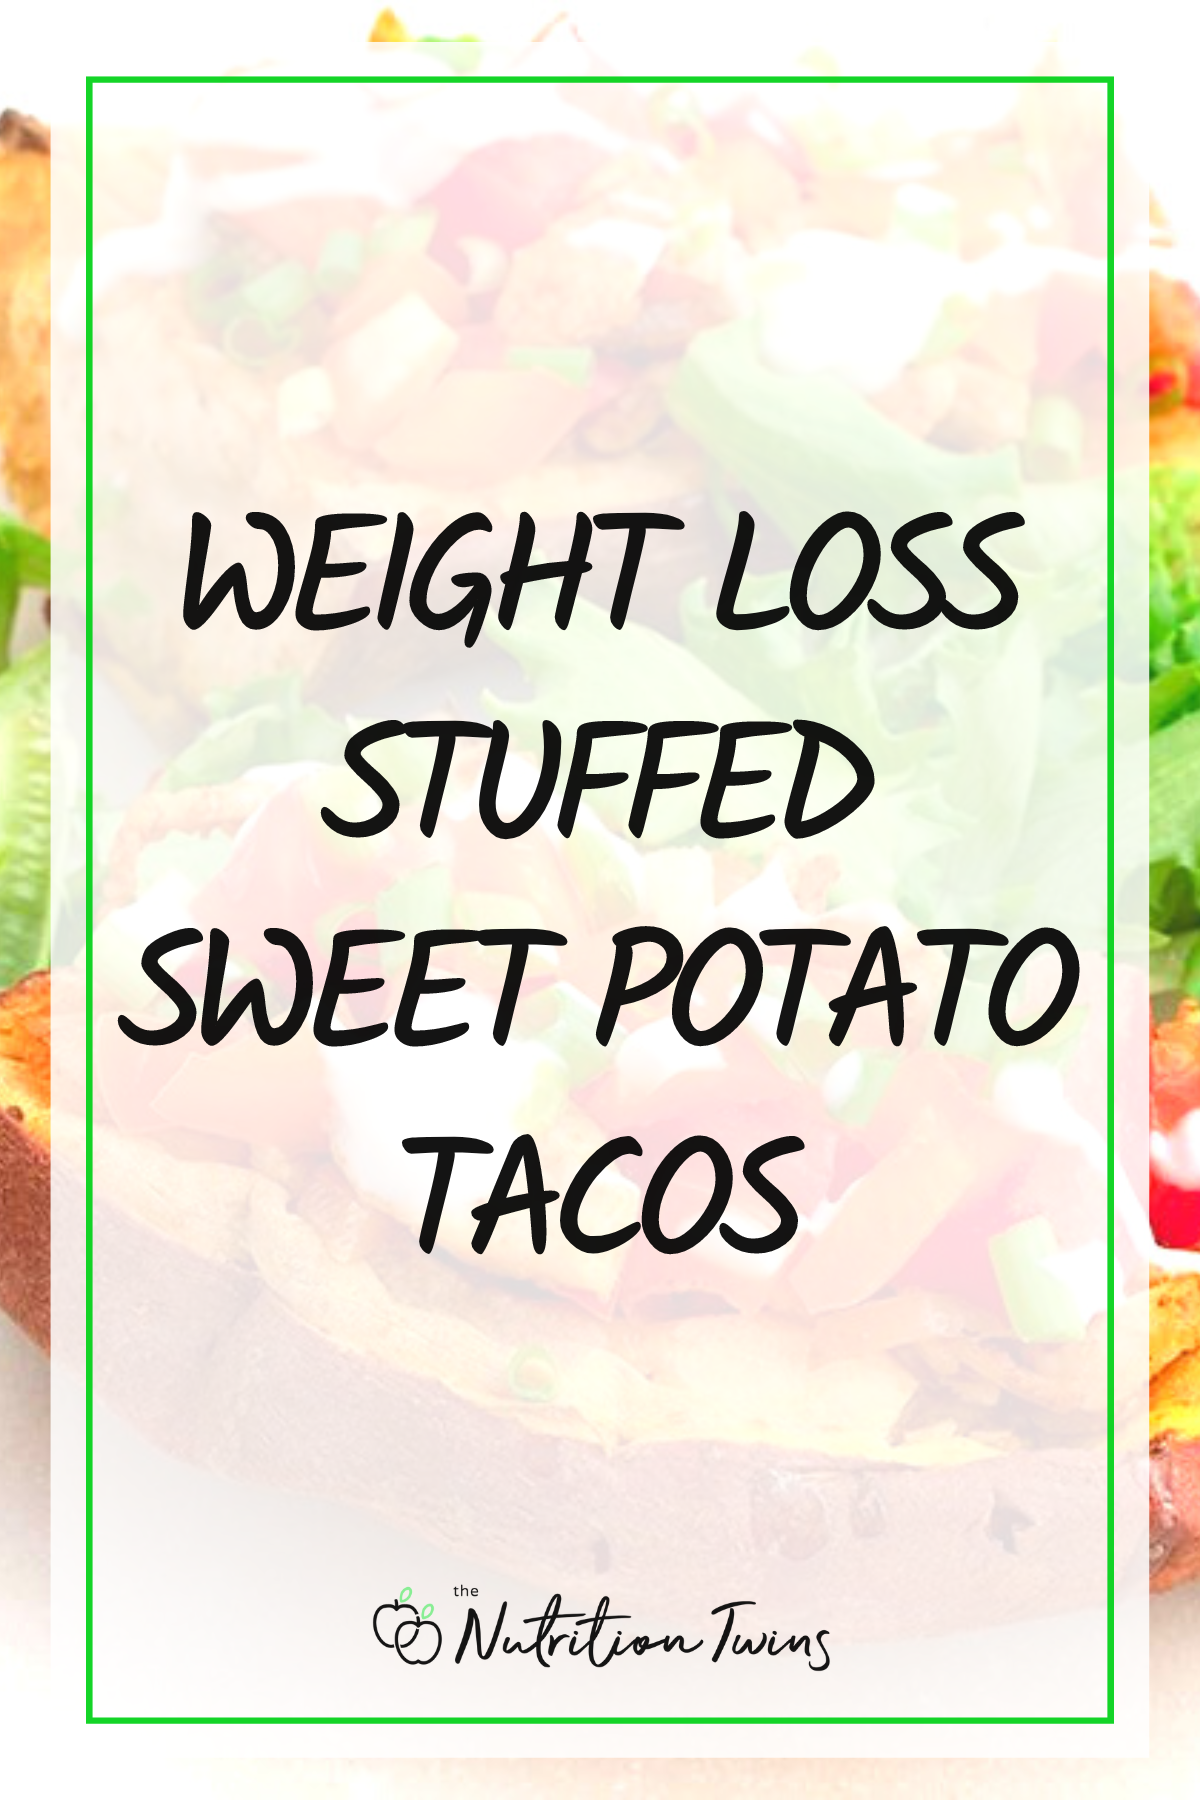 Boost weight loss with Stuffed Sweet Potato Tacos which make the perfect weekday dinner to help you lose belly fat!